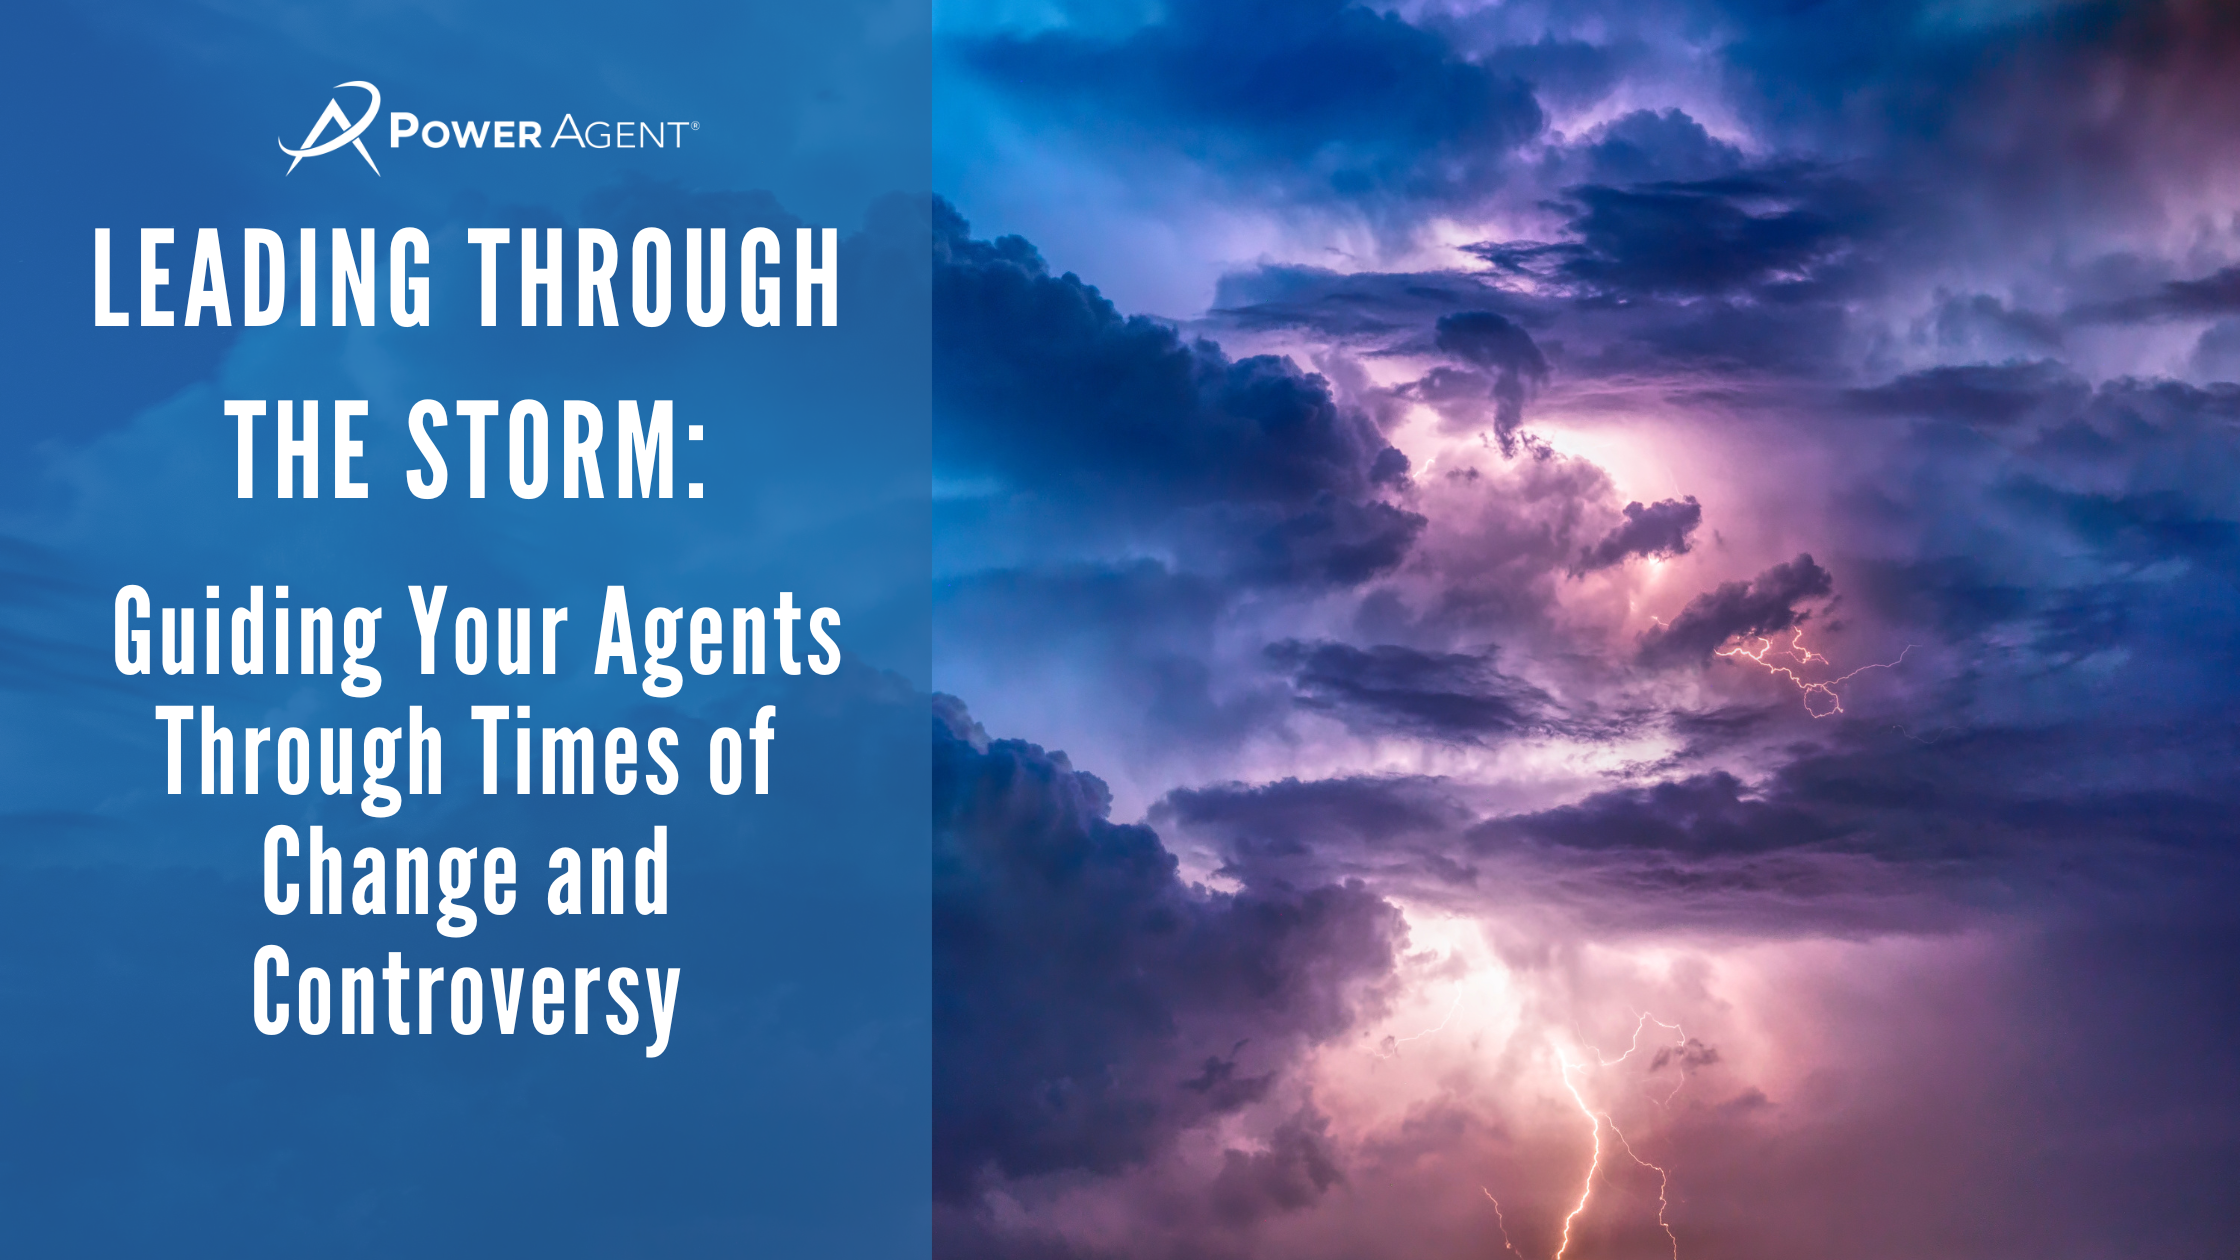 Leading Through the Storm: Guiding Your Agents Through Times of Change and Controversy